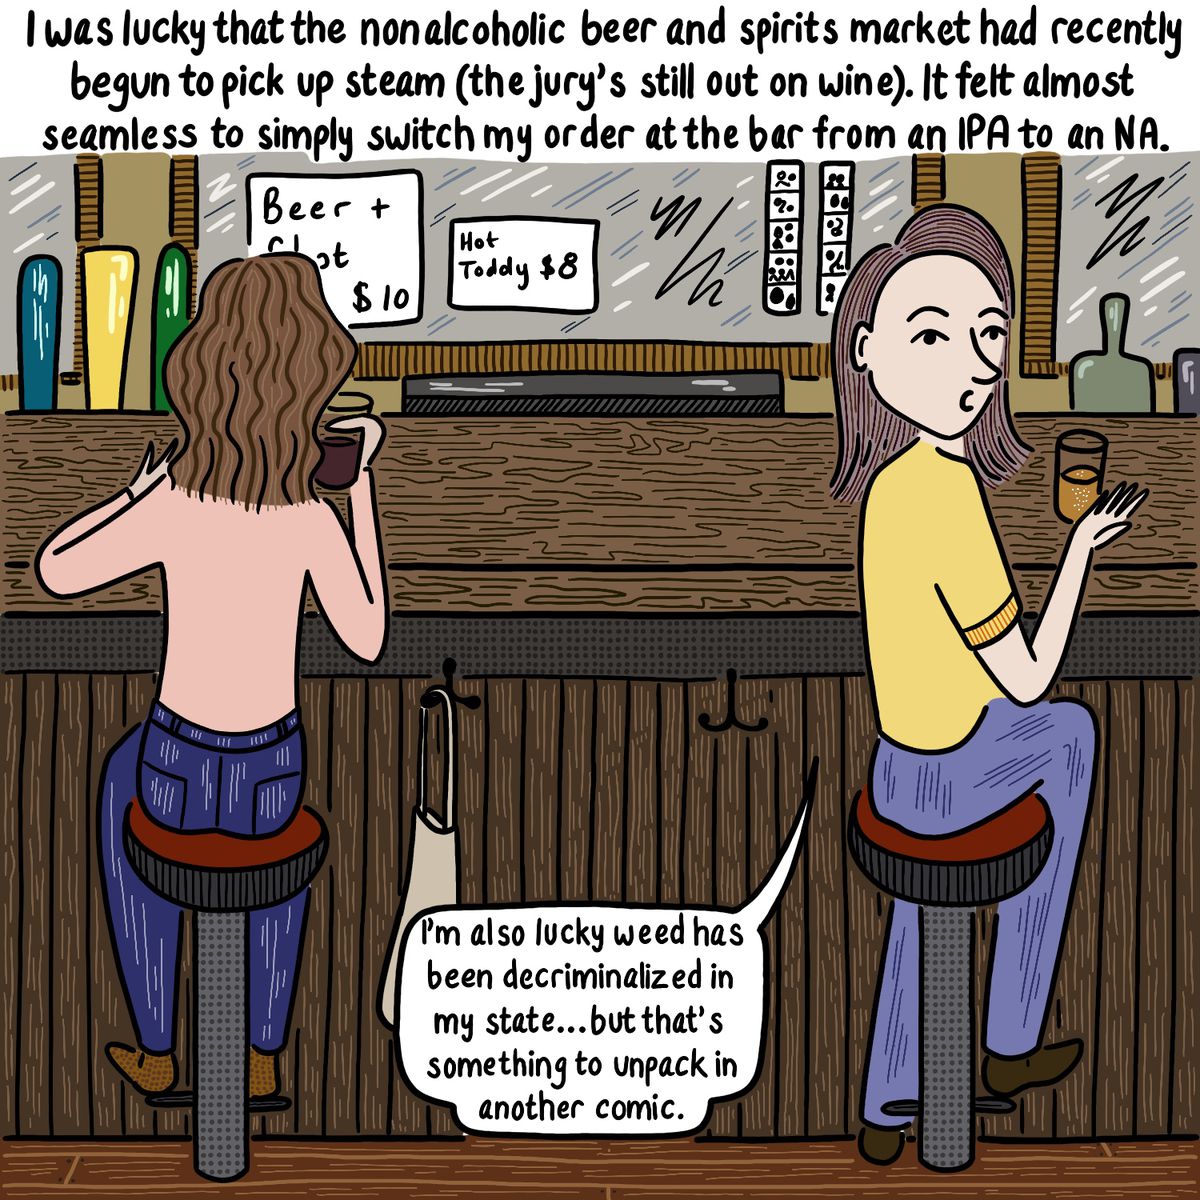 Woman sitting at a bar, turning over her shoulder to face the reader. Caption reads “I was lucky that the nonalcoholic beer and spirits market had recently begun to pick up steam (the jury’s still out on wine). It felt almost seamless to simply switch my order at the bar from an IPA to an NA.” The woman says, “I’m also lucky weed has been decriminalized in my state…but that’s something to unpack in another comic.”